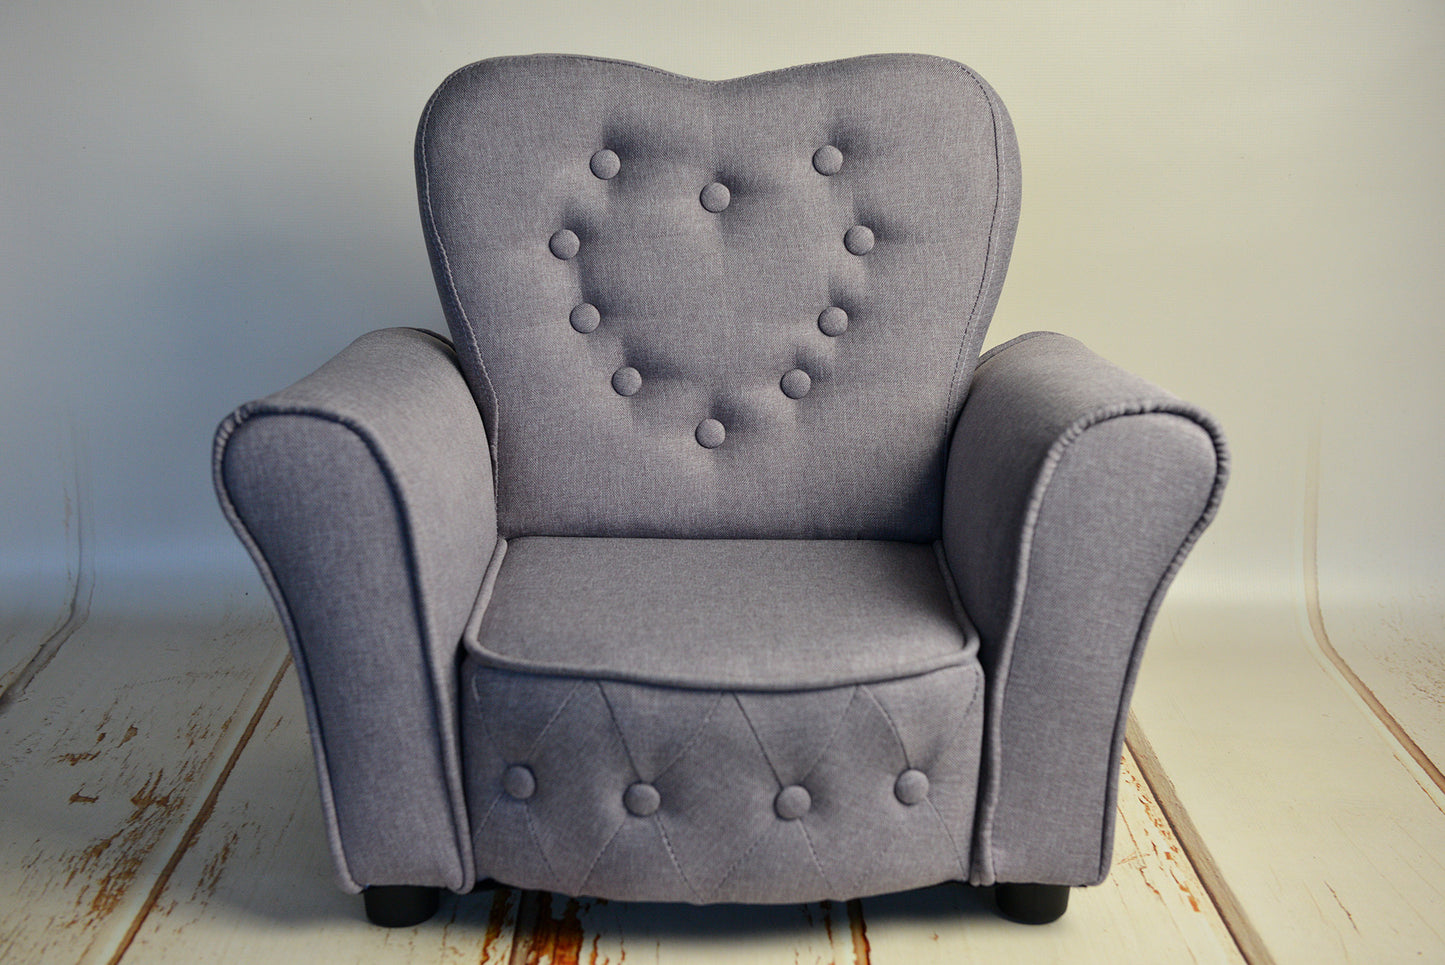 Mini Sofa for baby photography prop